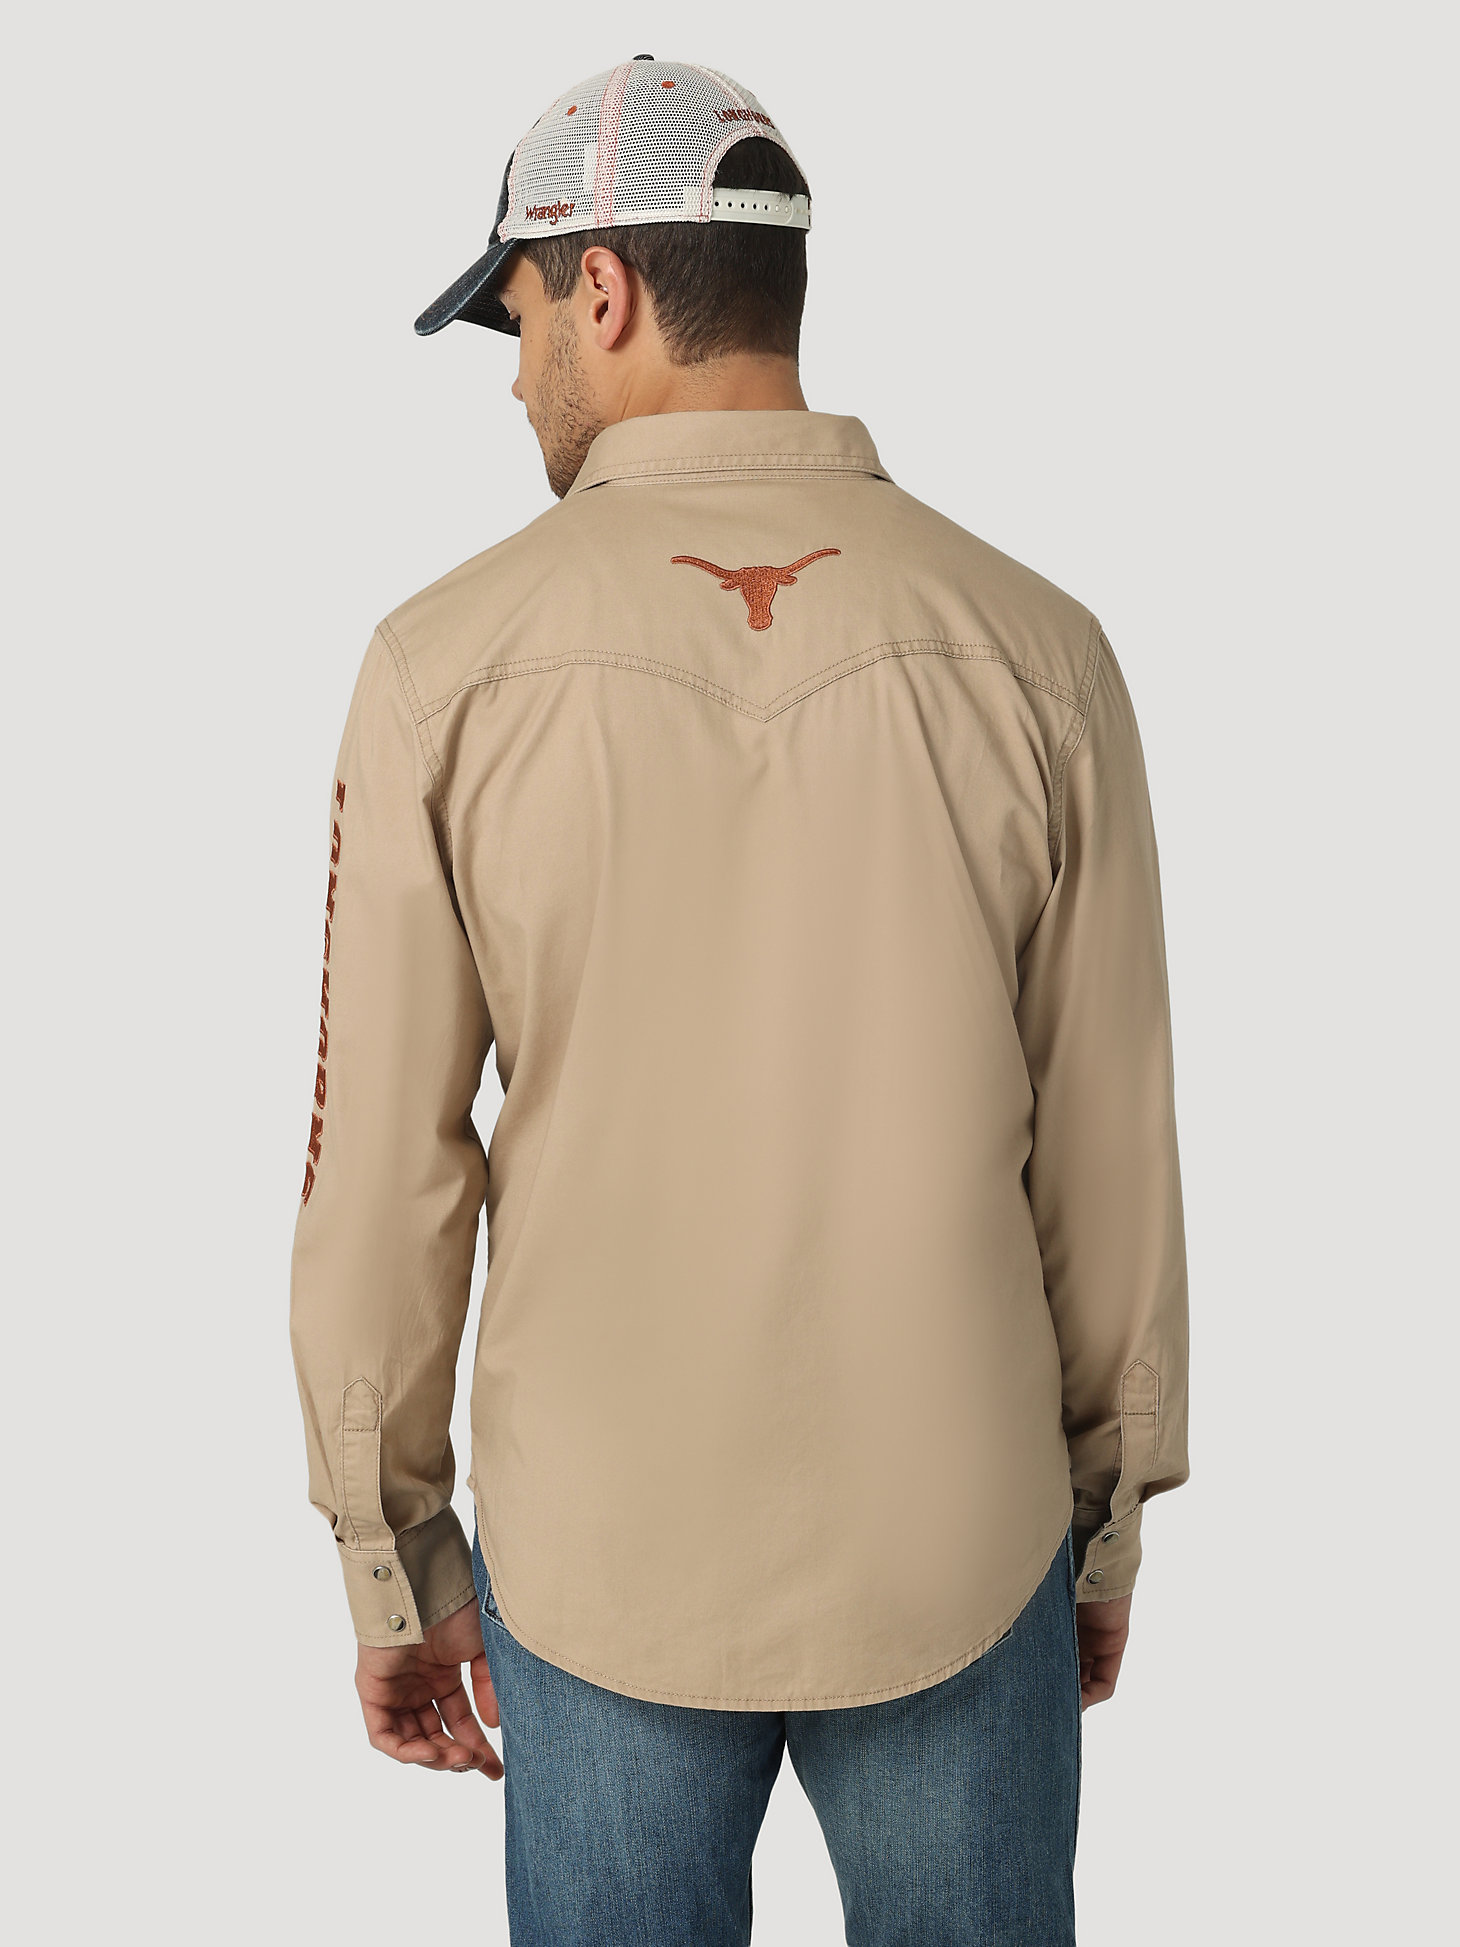 Wrangler Collegiate Embroidered Twill Western Snap Shirt in University of Texas alternative view 1